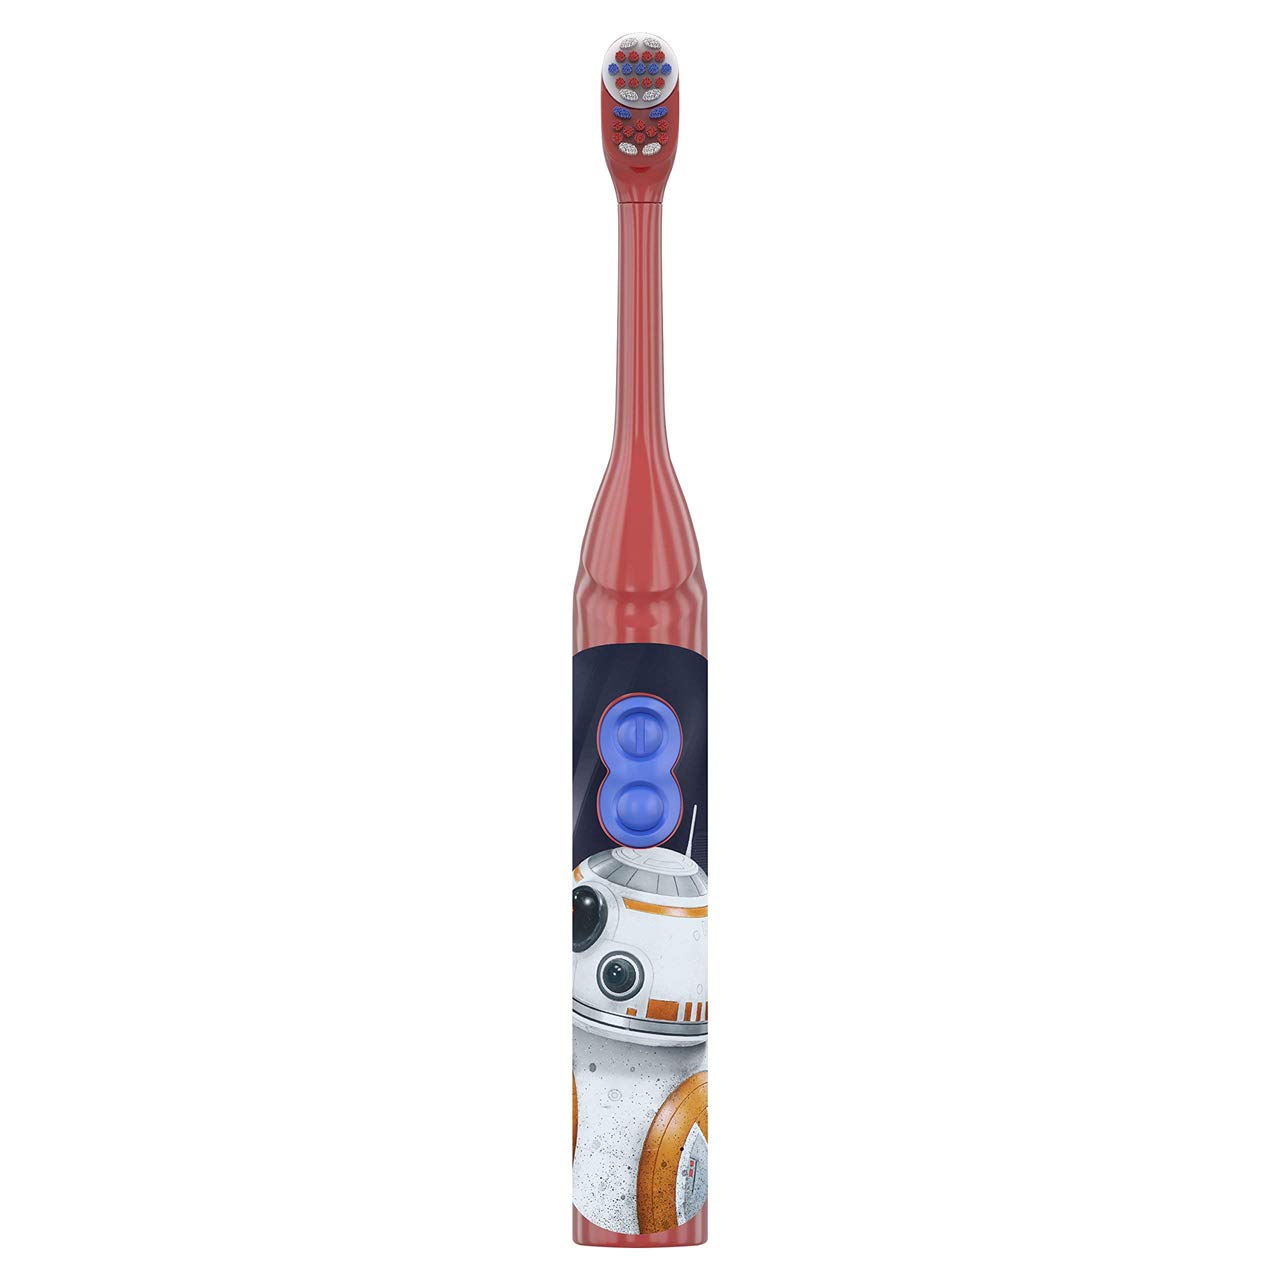 Oral-B Kids Battery Powered Electric Toothbrush Featuring Disney STAR WARS with Extra Soft Bristles